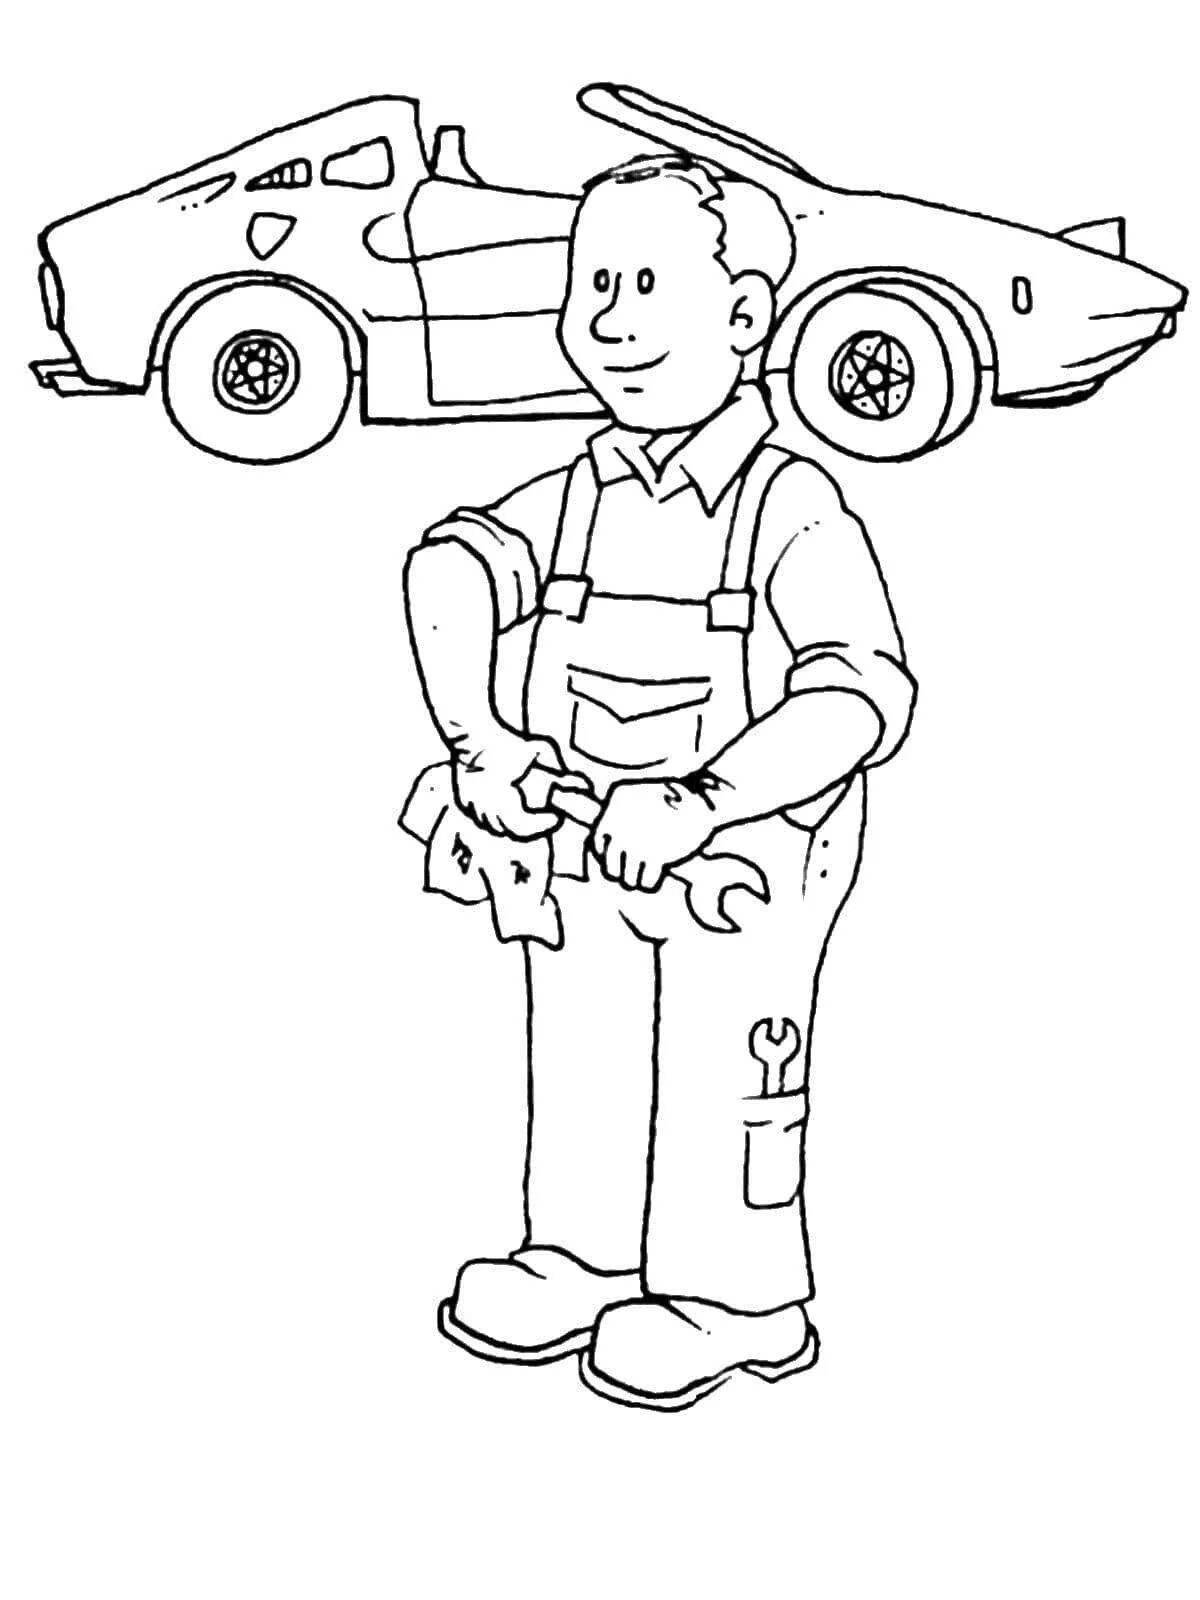 Coloring page bright bus driver